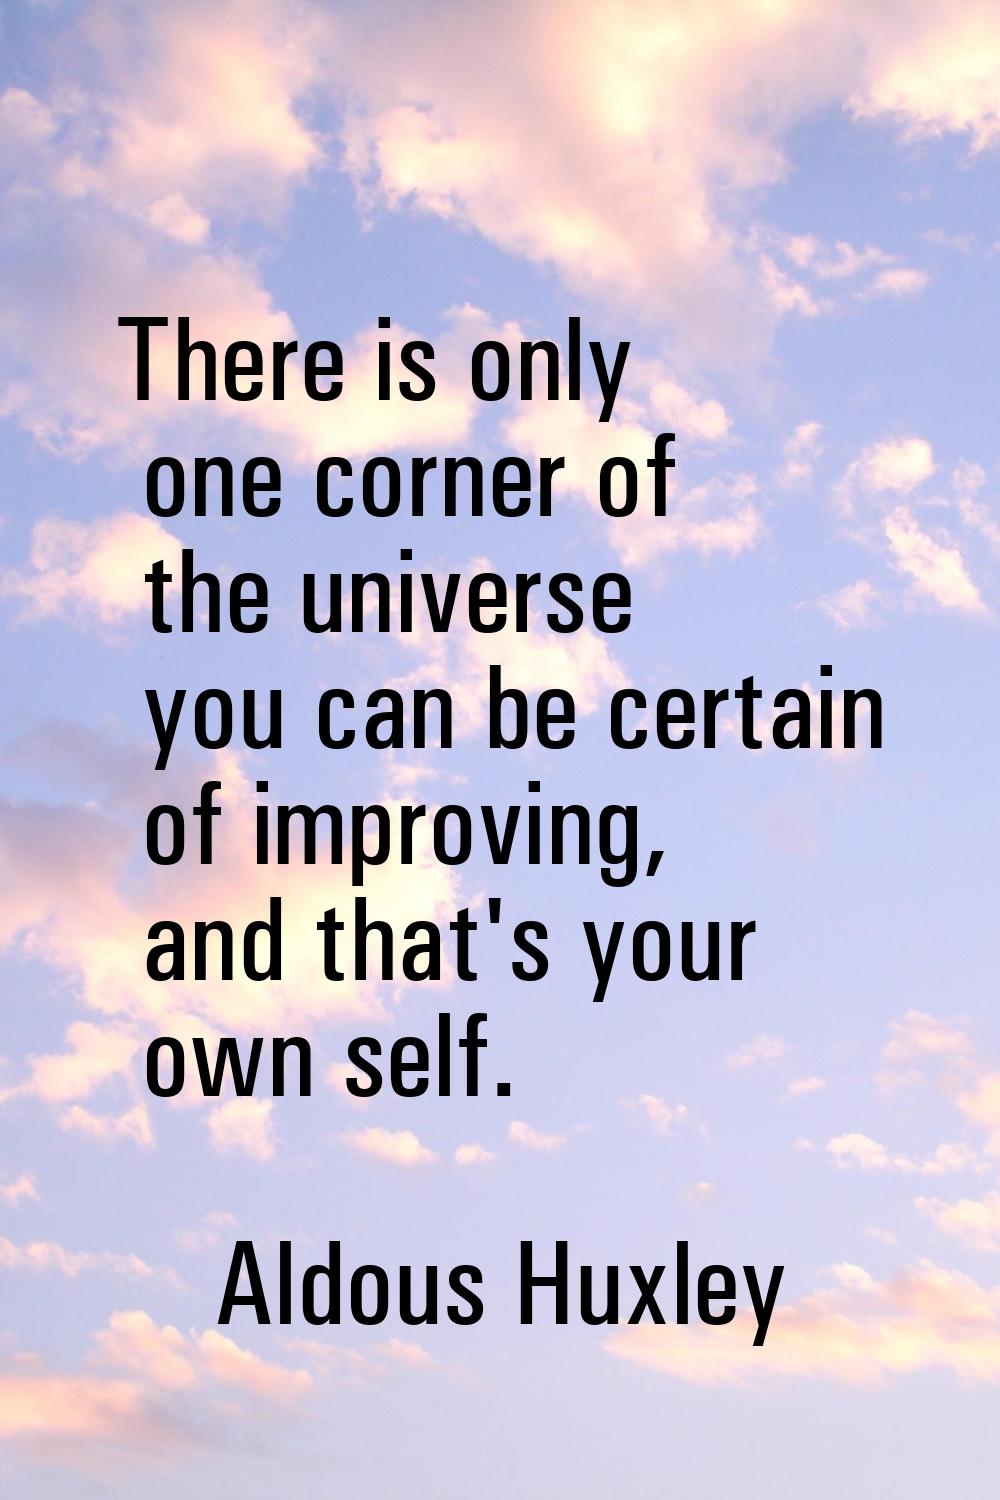 There is only one corner of the universe you can be certain of improving, and that's your own self.